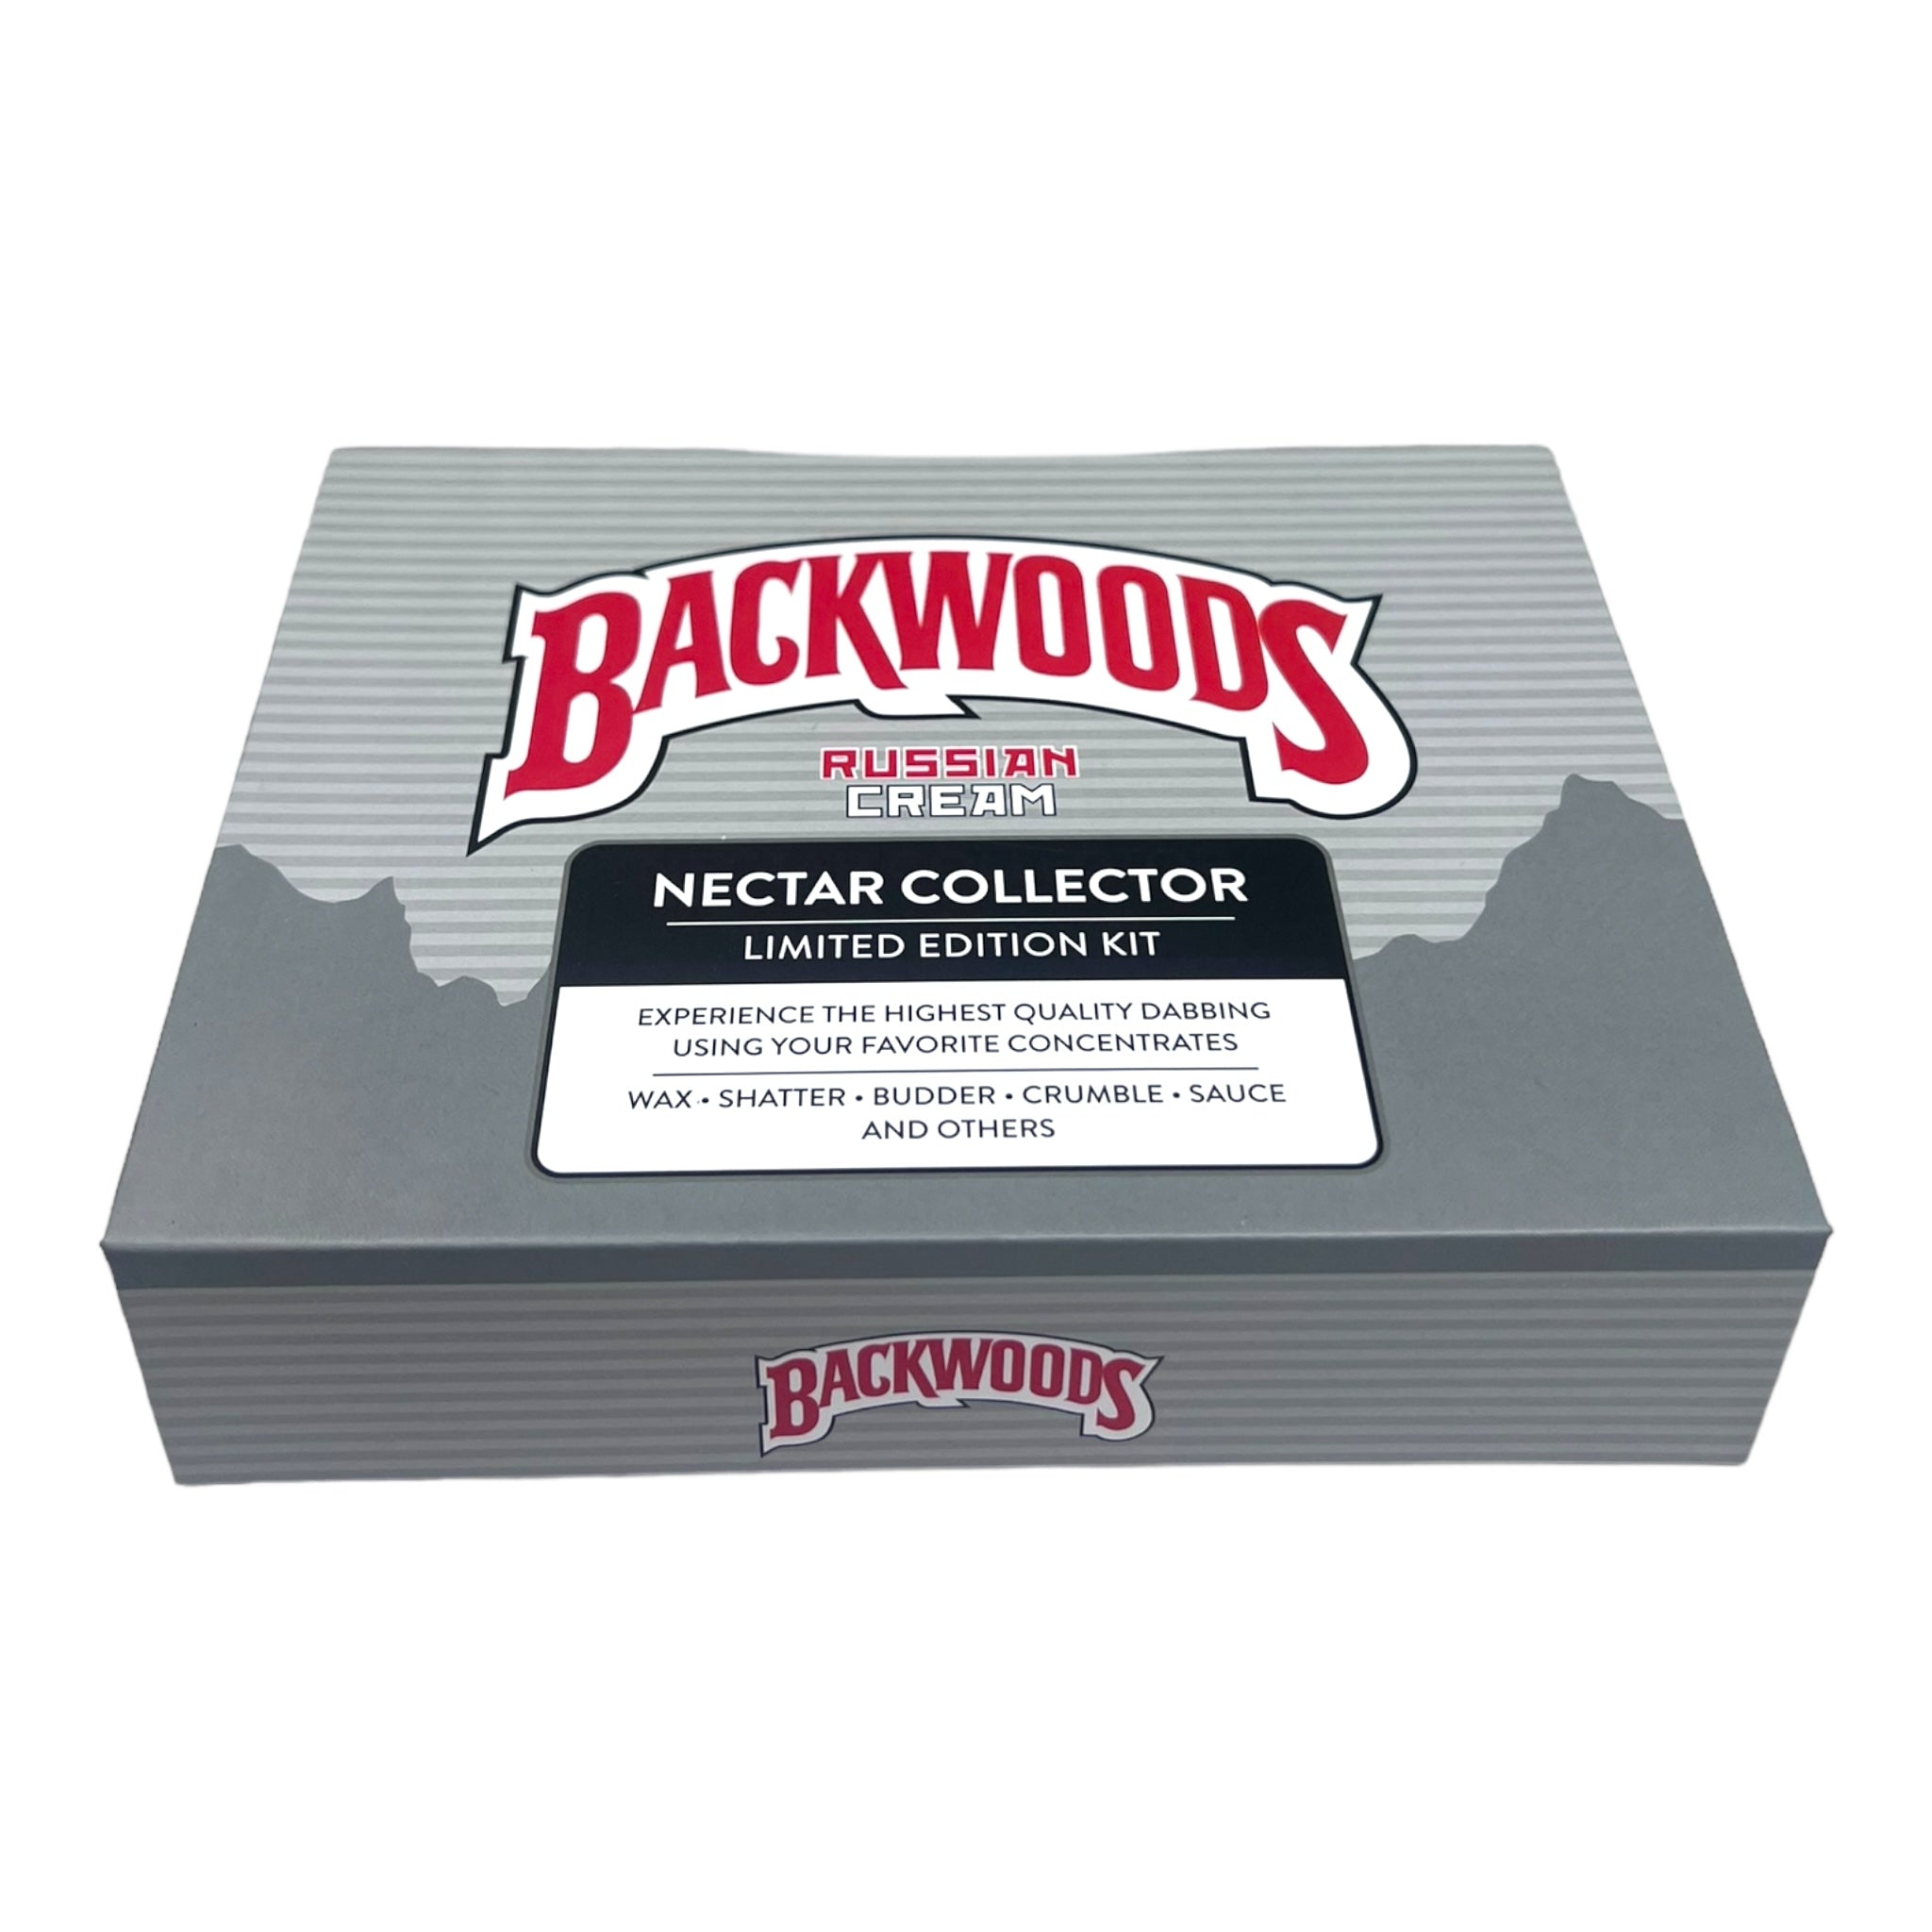 Backwoods Nectar Collector Kit